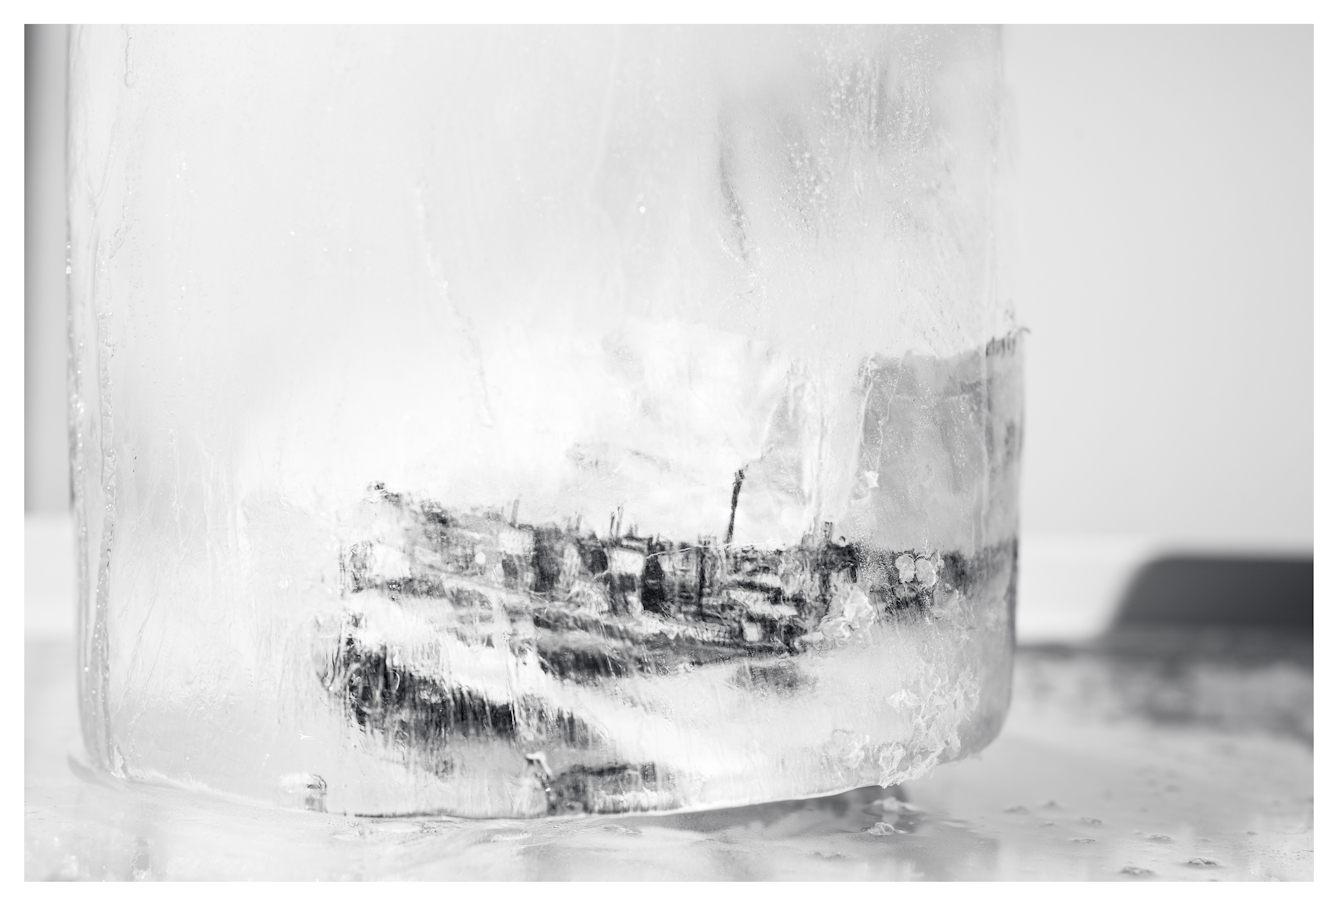 Monotone photograph showing a cylindrical core of frozen water. Encased within the ice is an illustration of an industrial town scene from the 1800s that can just be seen through the distortions of the ice wall and opaque frosting. The ice core is standing vertically on a glass fridge freezer shelf.